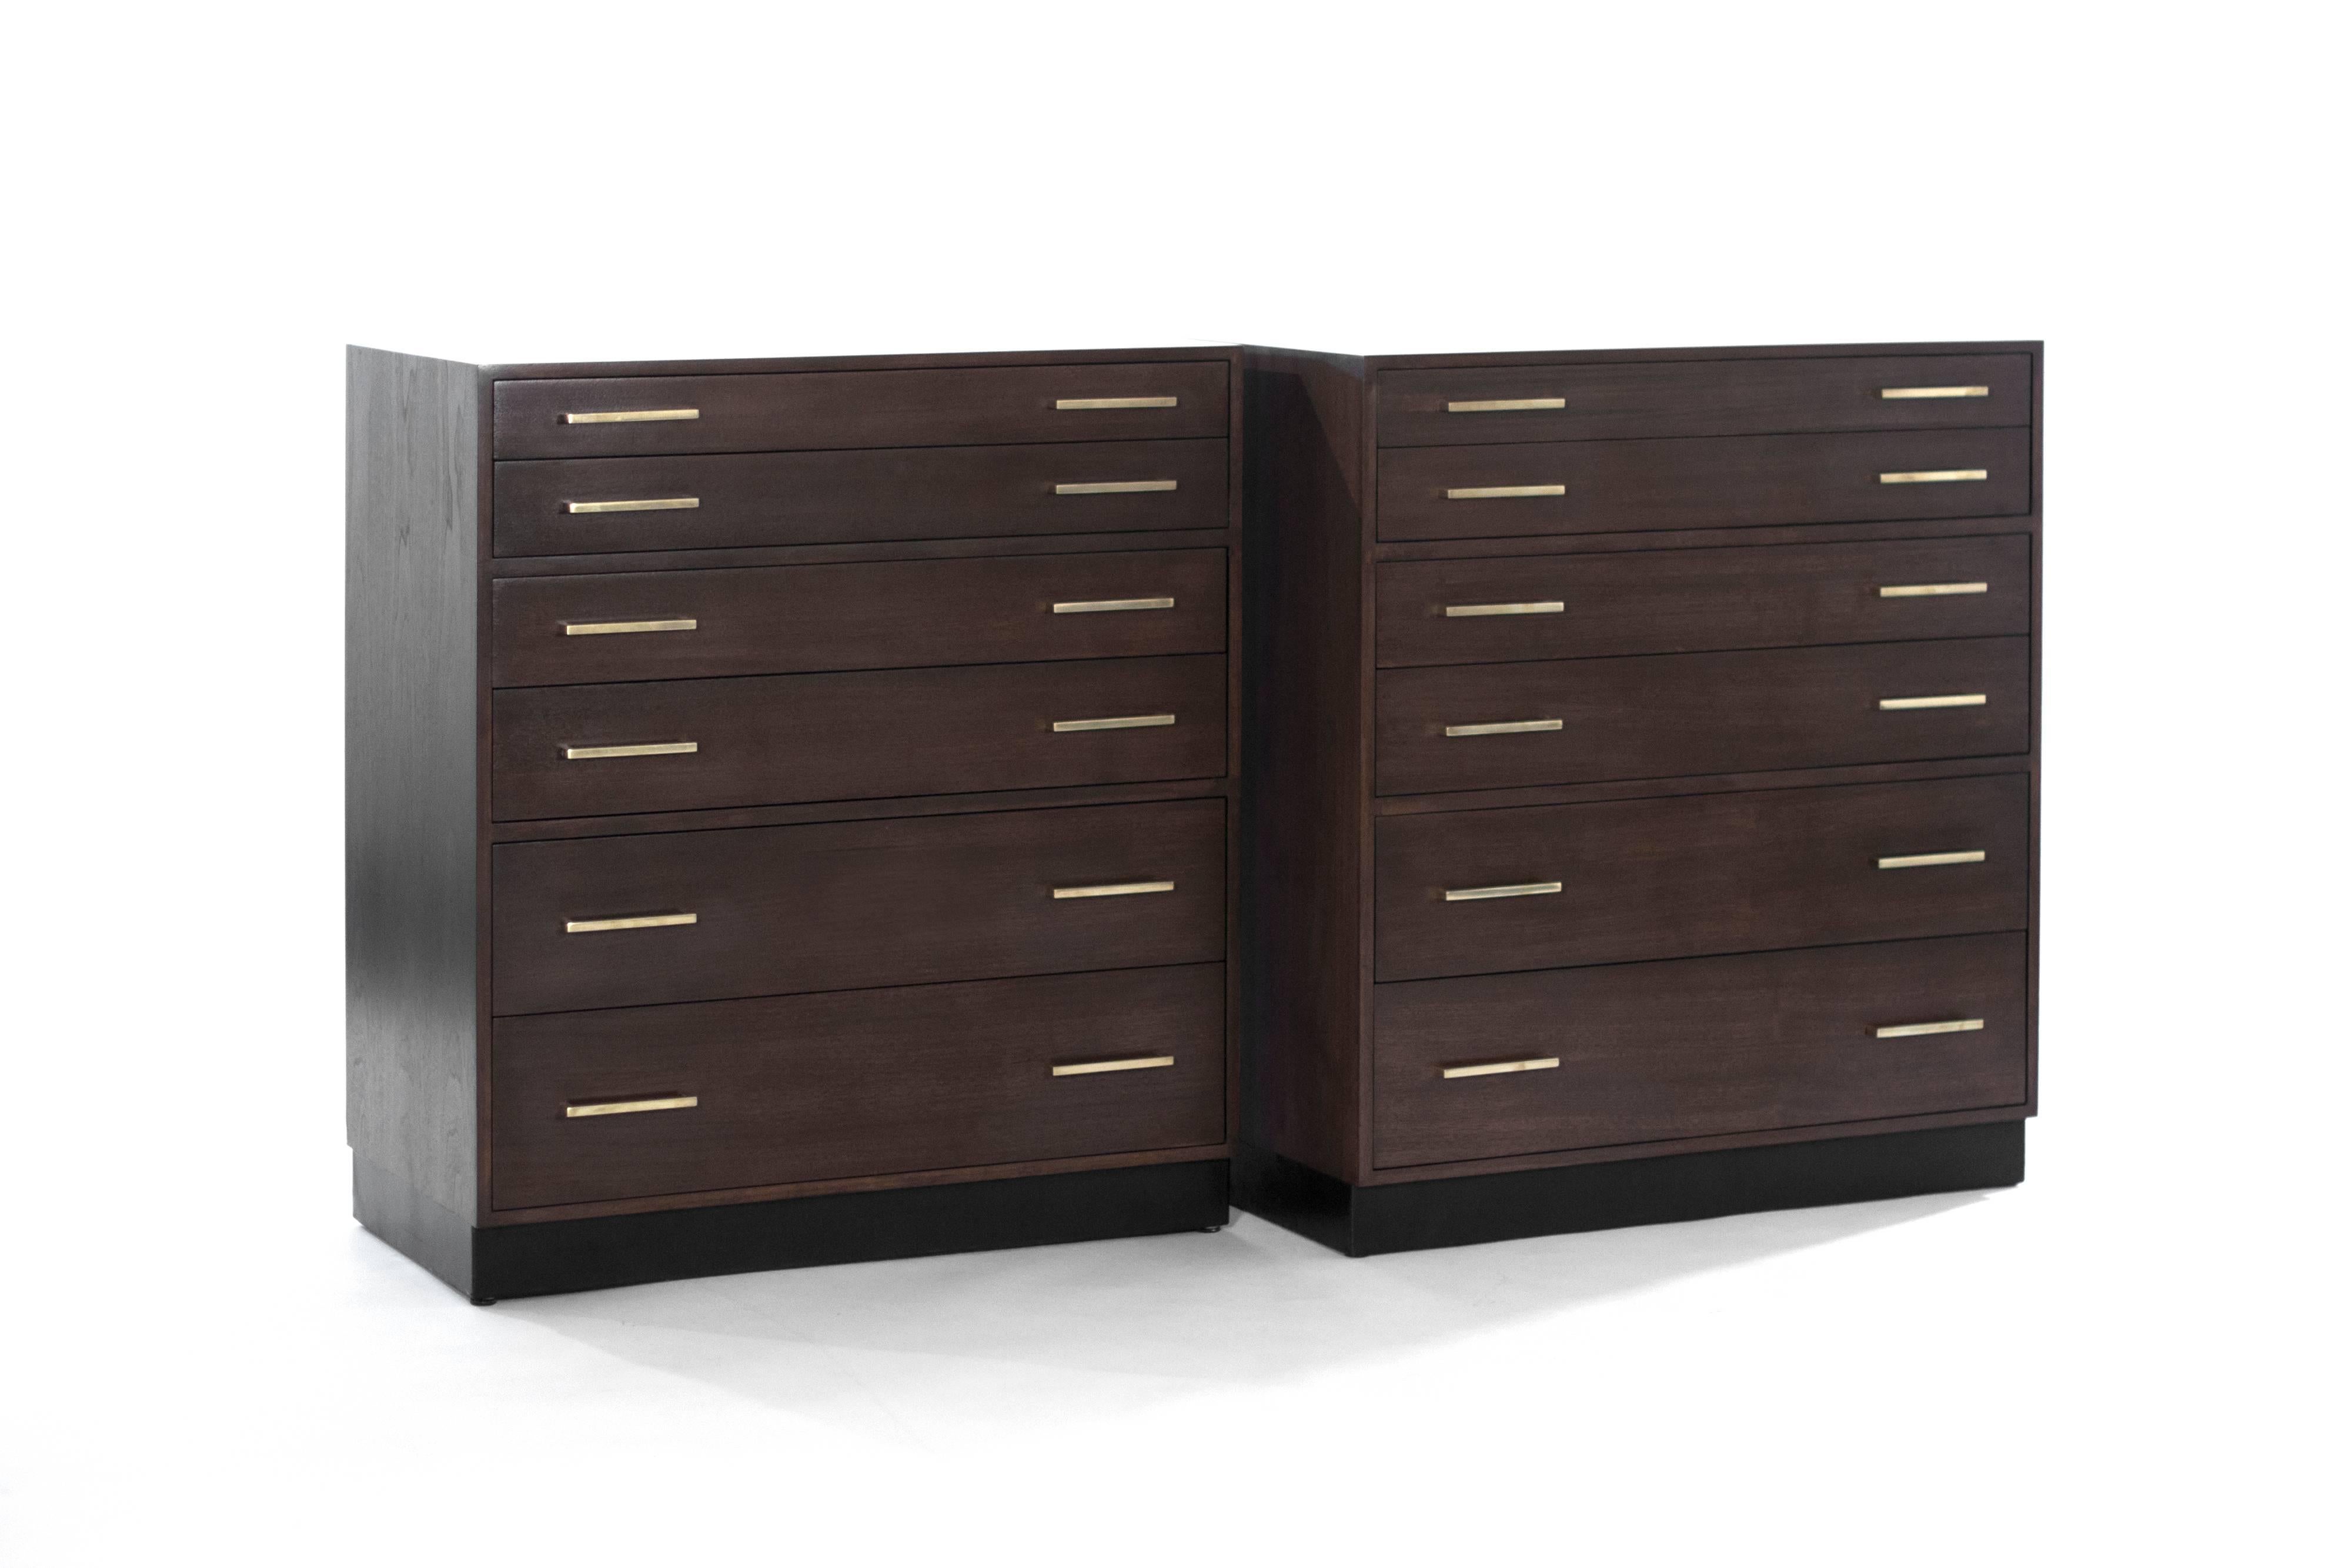 Stunning pair of chest of drawers by Edward Wormley for Dunbar. Six drawers provide ample storage space for clothing as well as accessories. Walnut case fully restored, brass pulls newly hand polished.